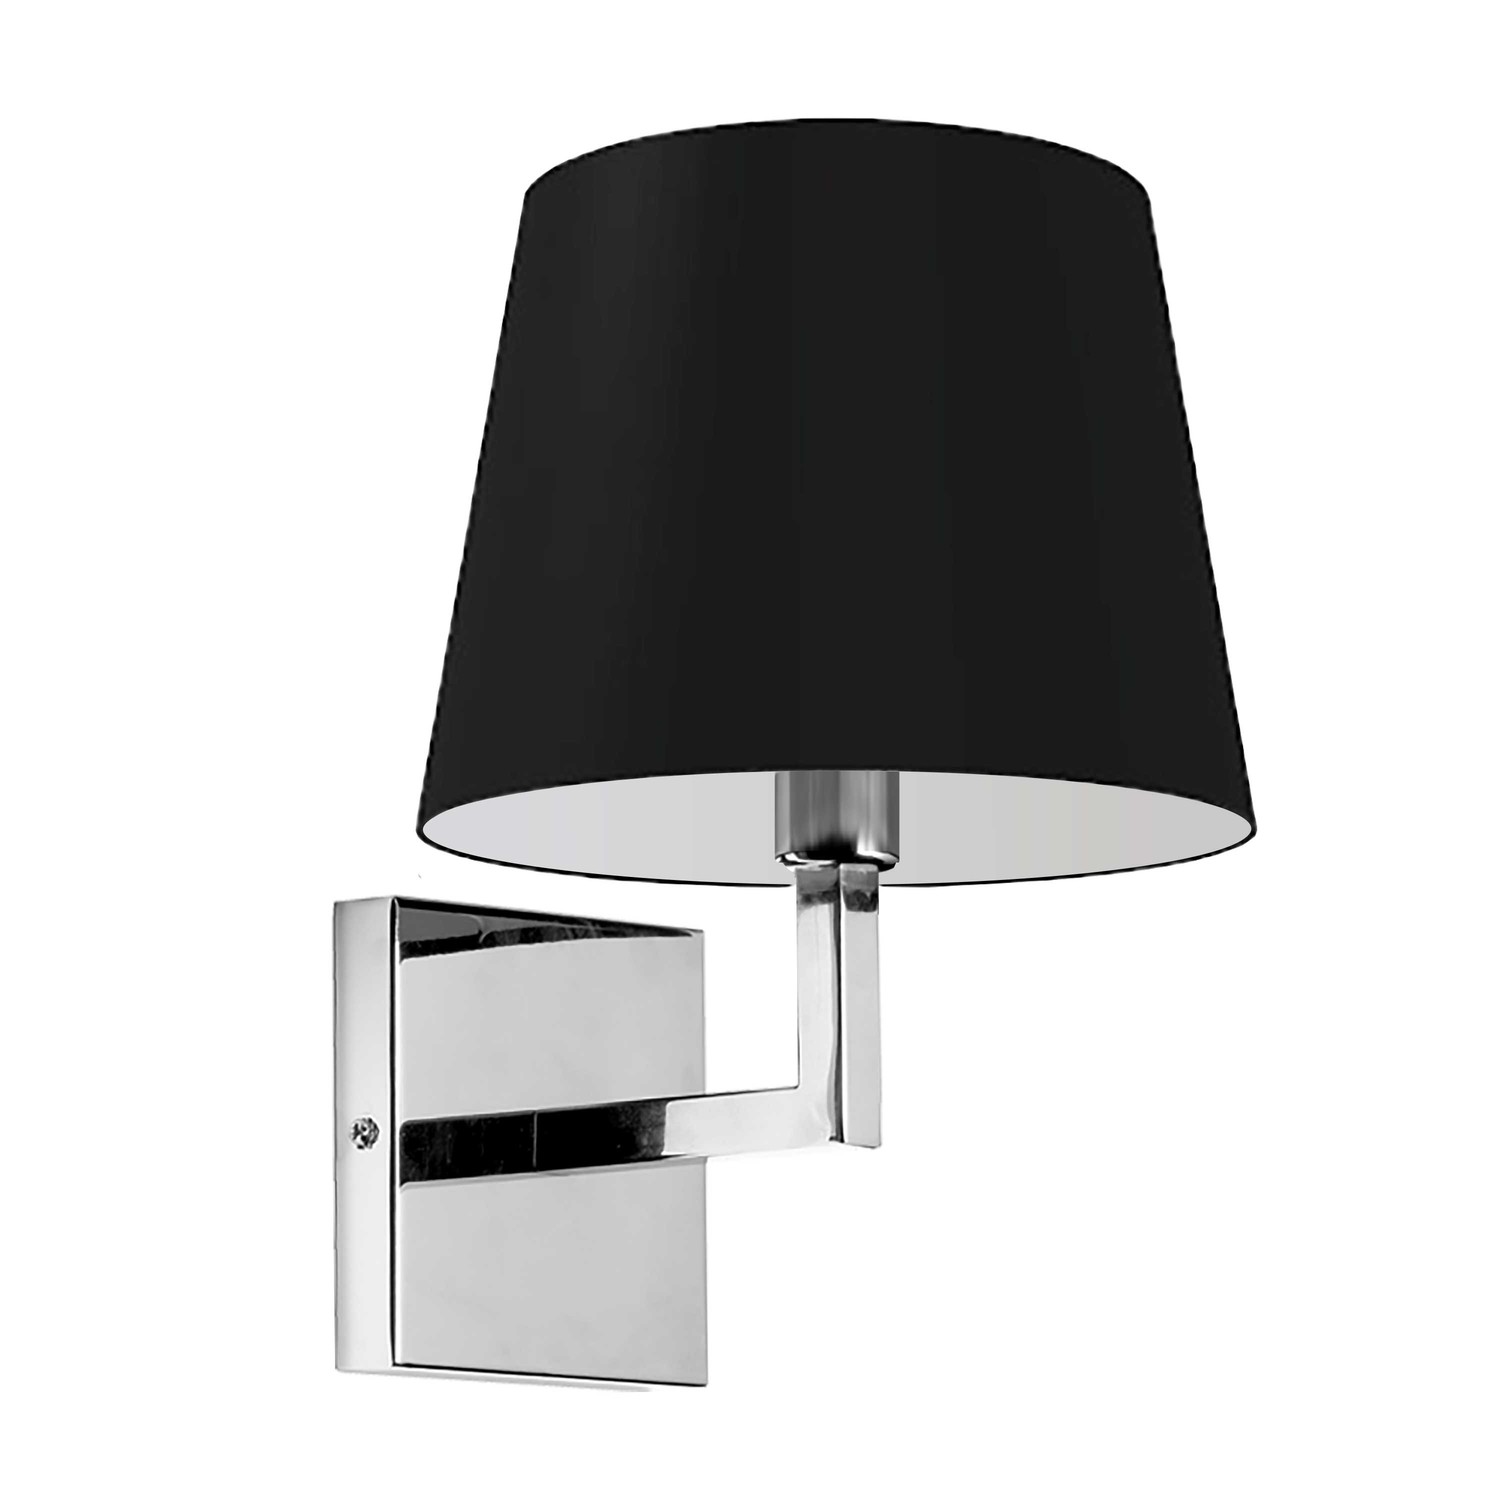 1 Light Incandescent Wall, Sconce Polished Chrome with Black Shade    (WHN-91W-PC-BK)